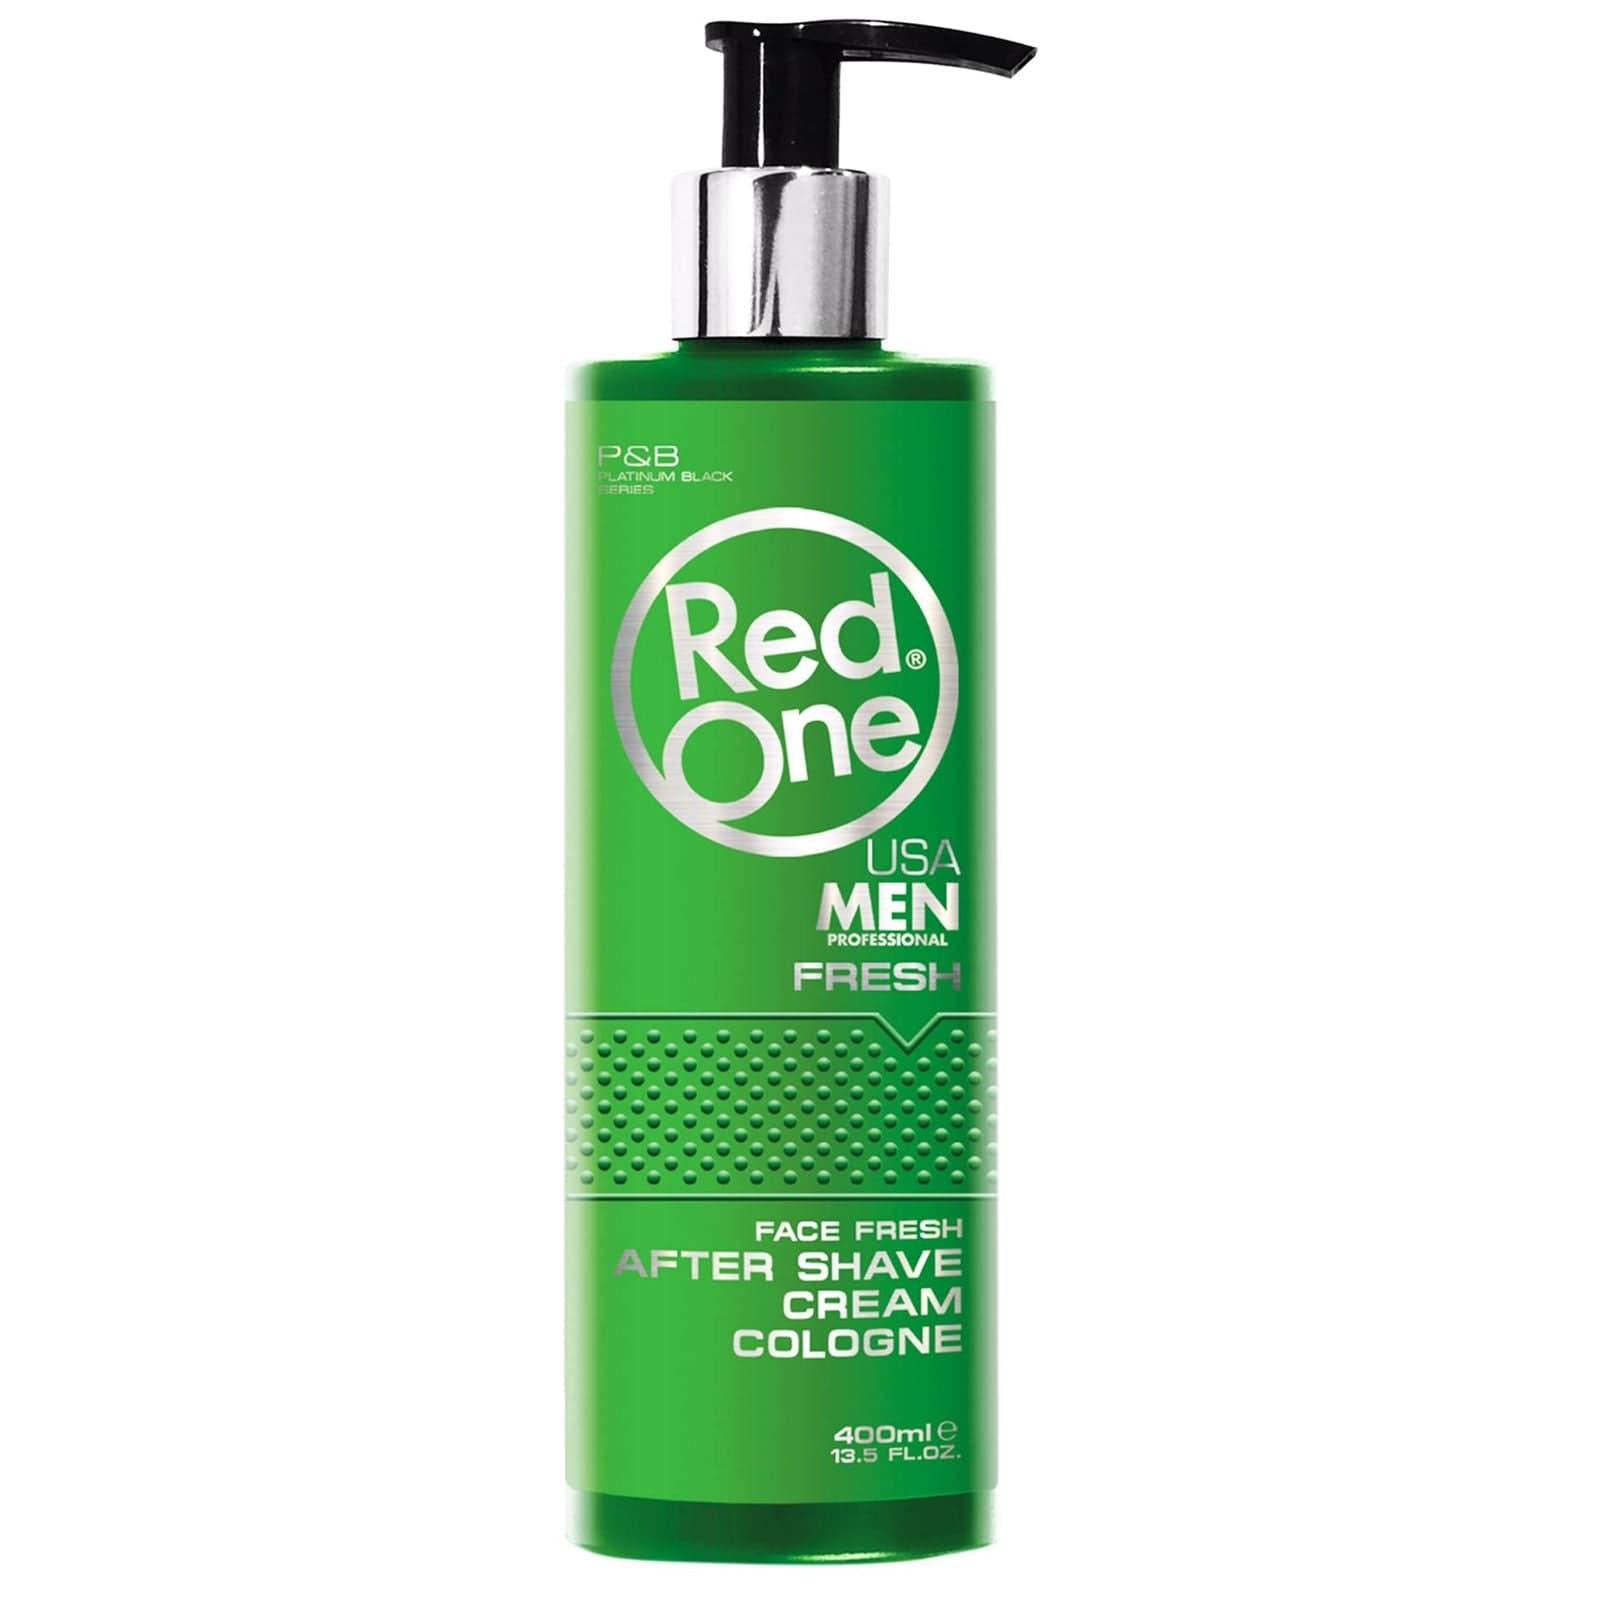 RedOne After Shave Cream Cologne Fresh 400ml